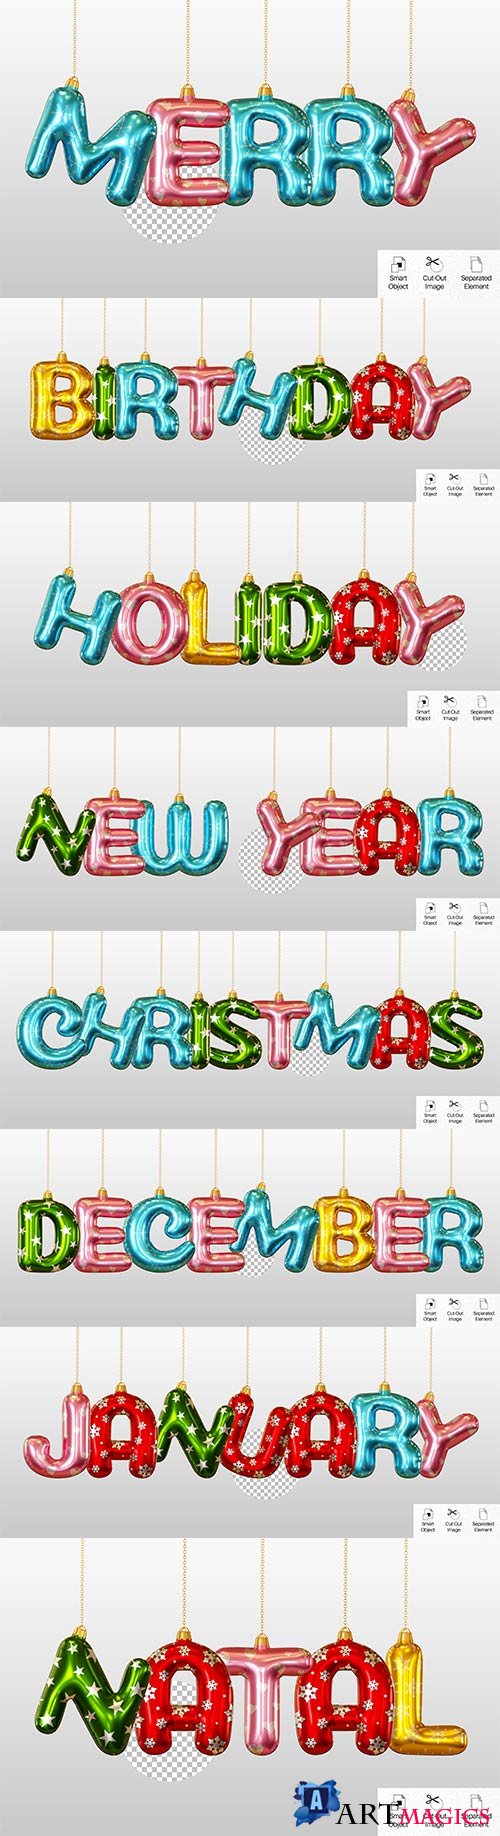 Holiday greeting word 3d text effect render psd